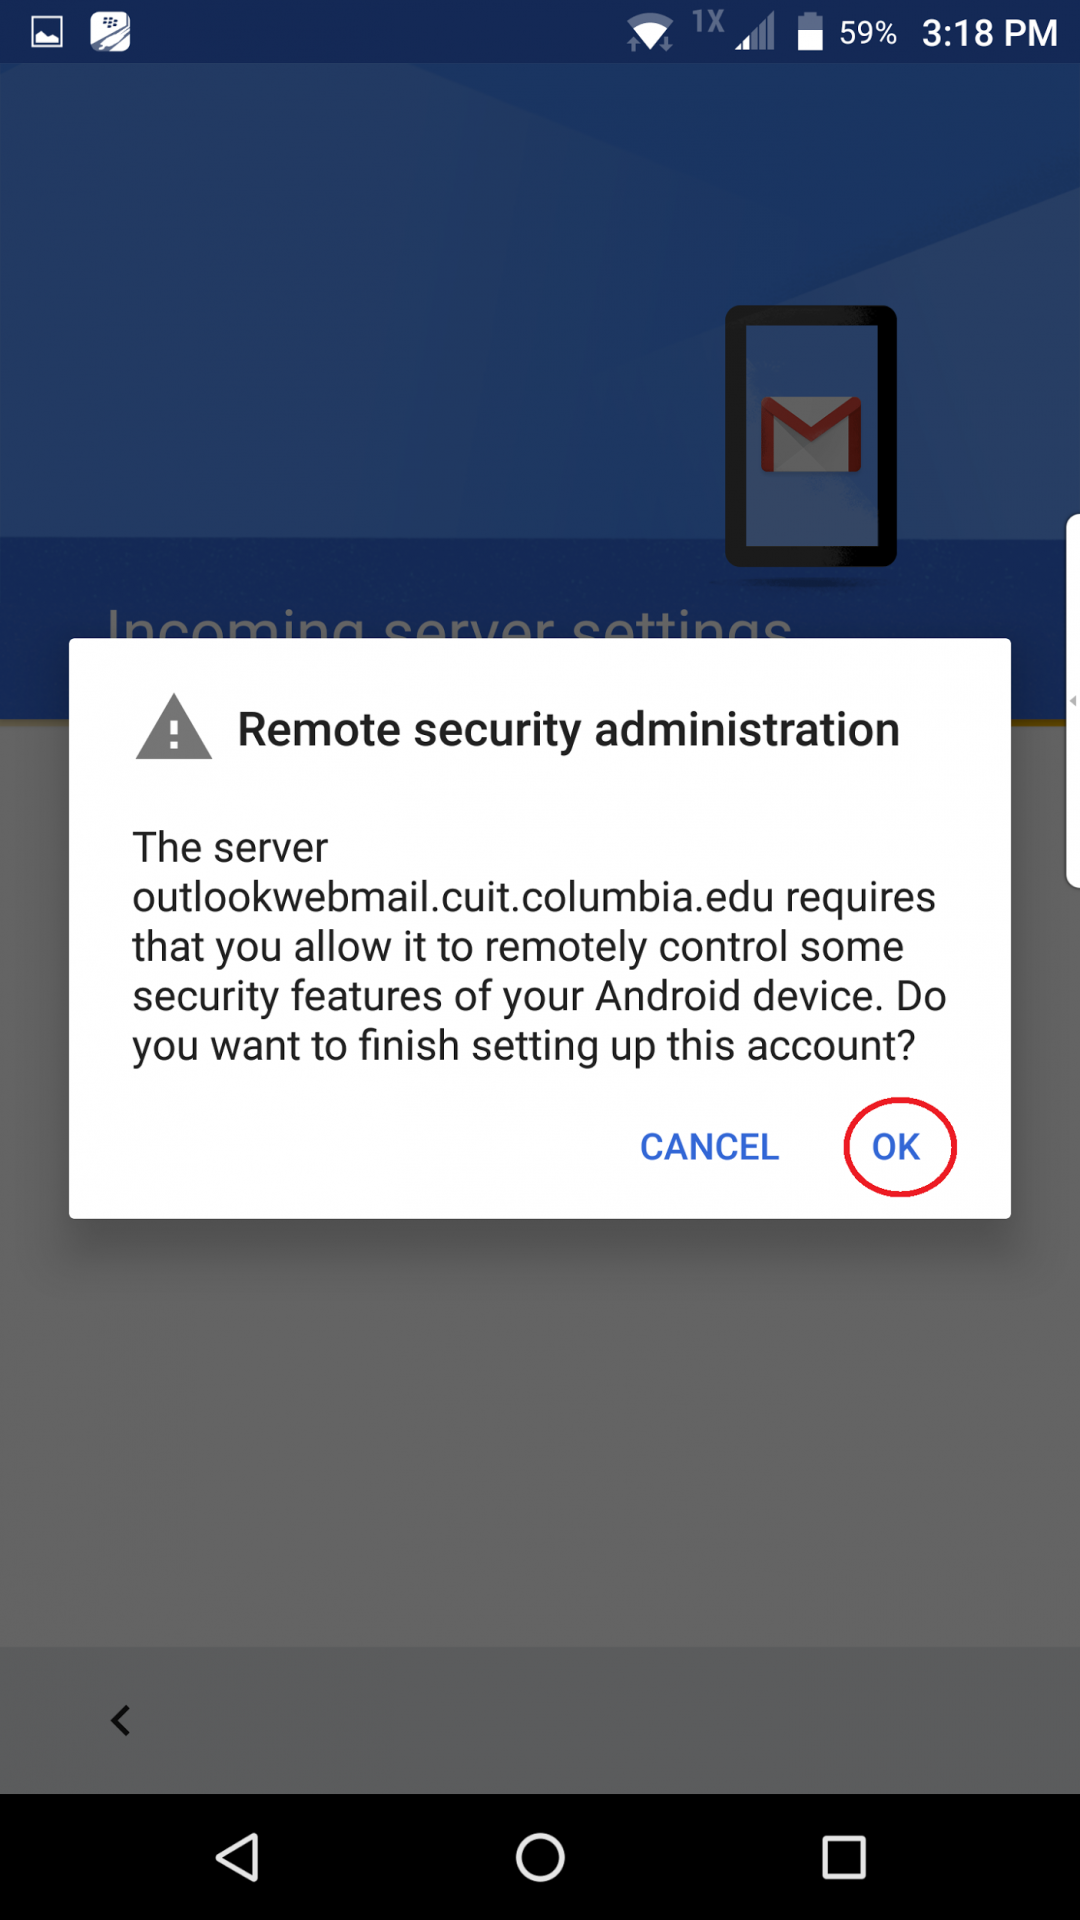 Remote security administration pop-up with OK circled